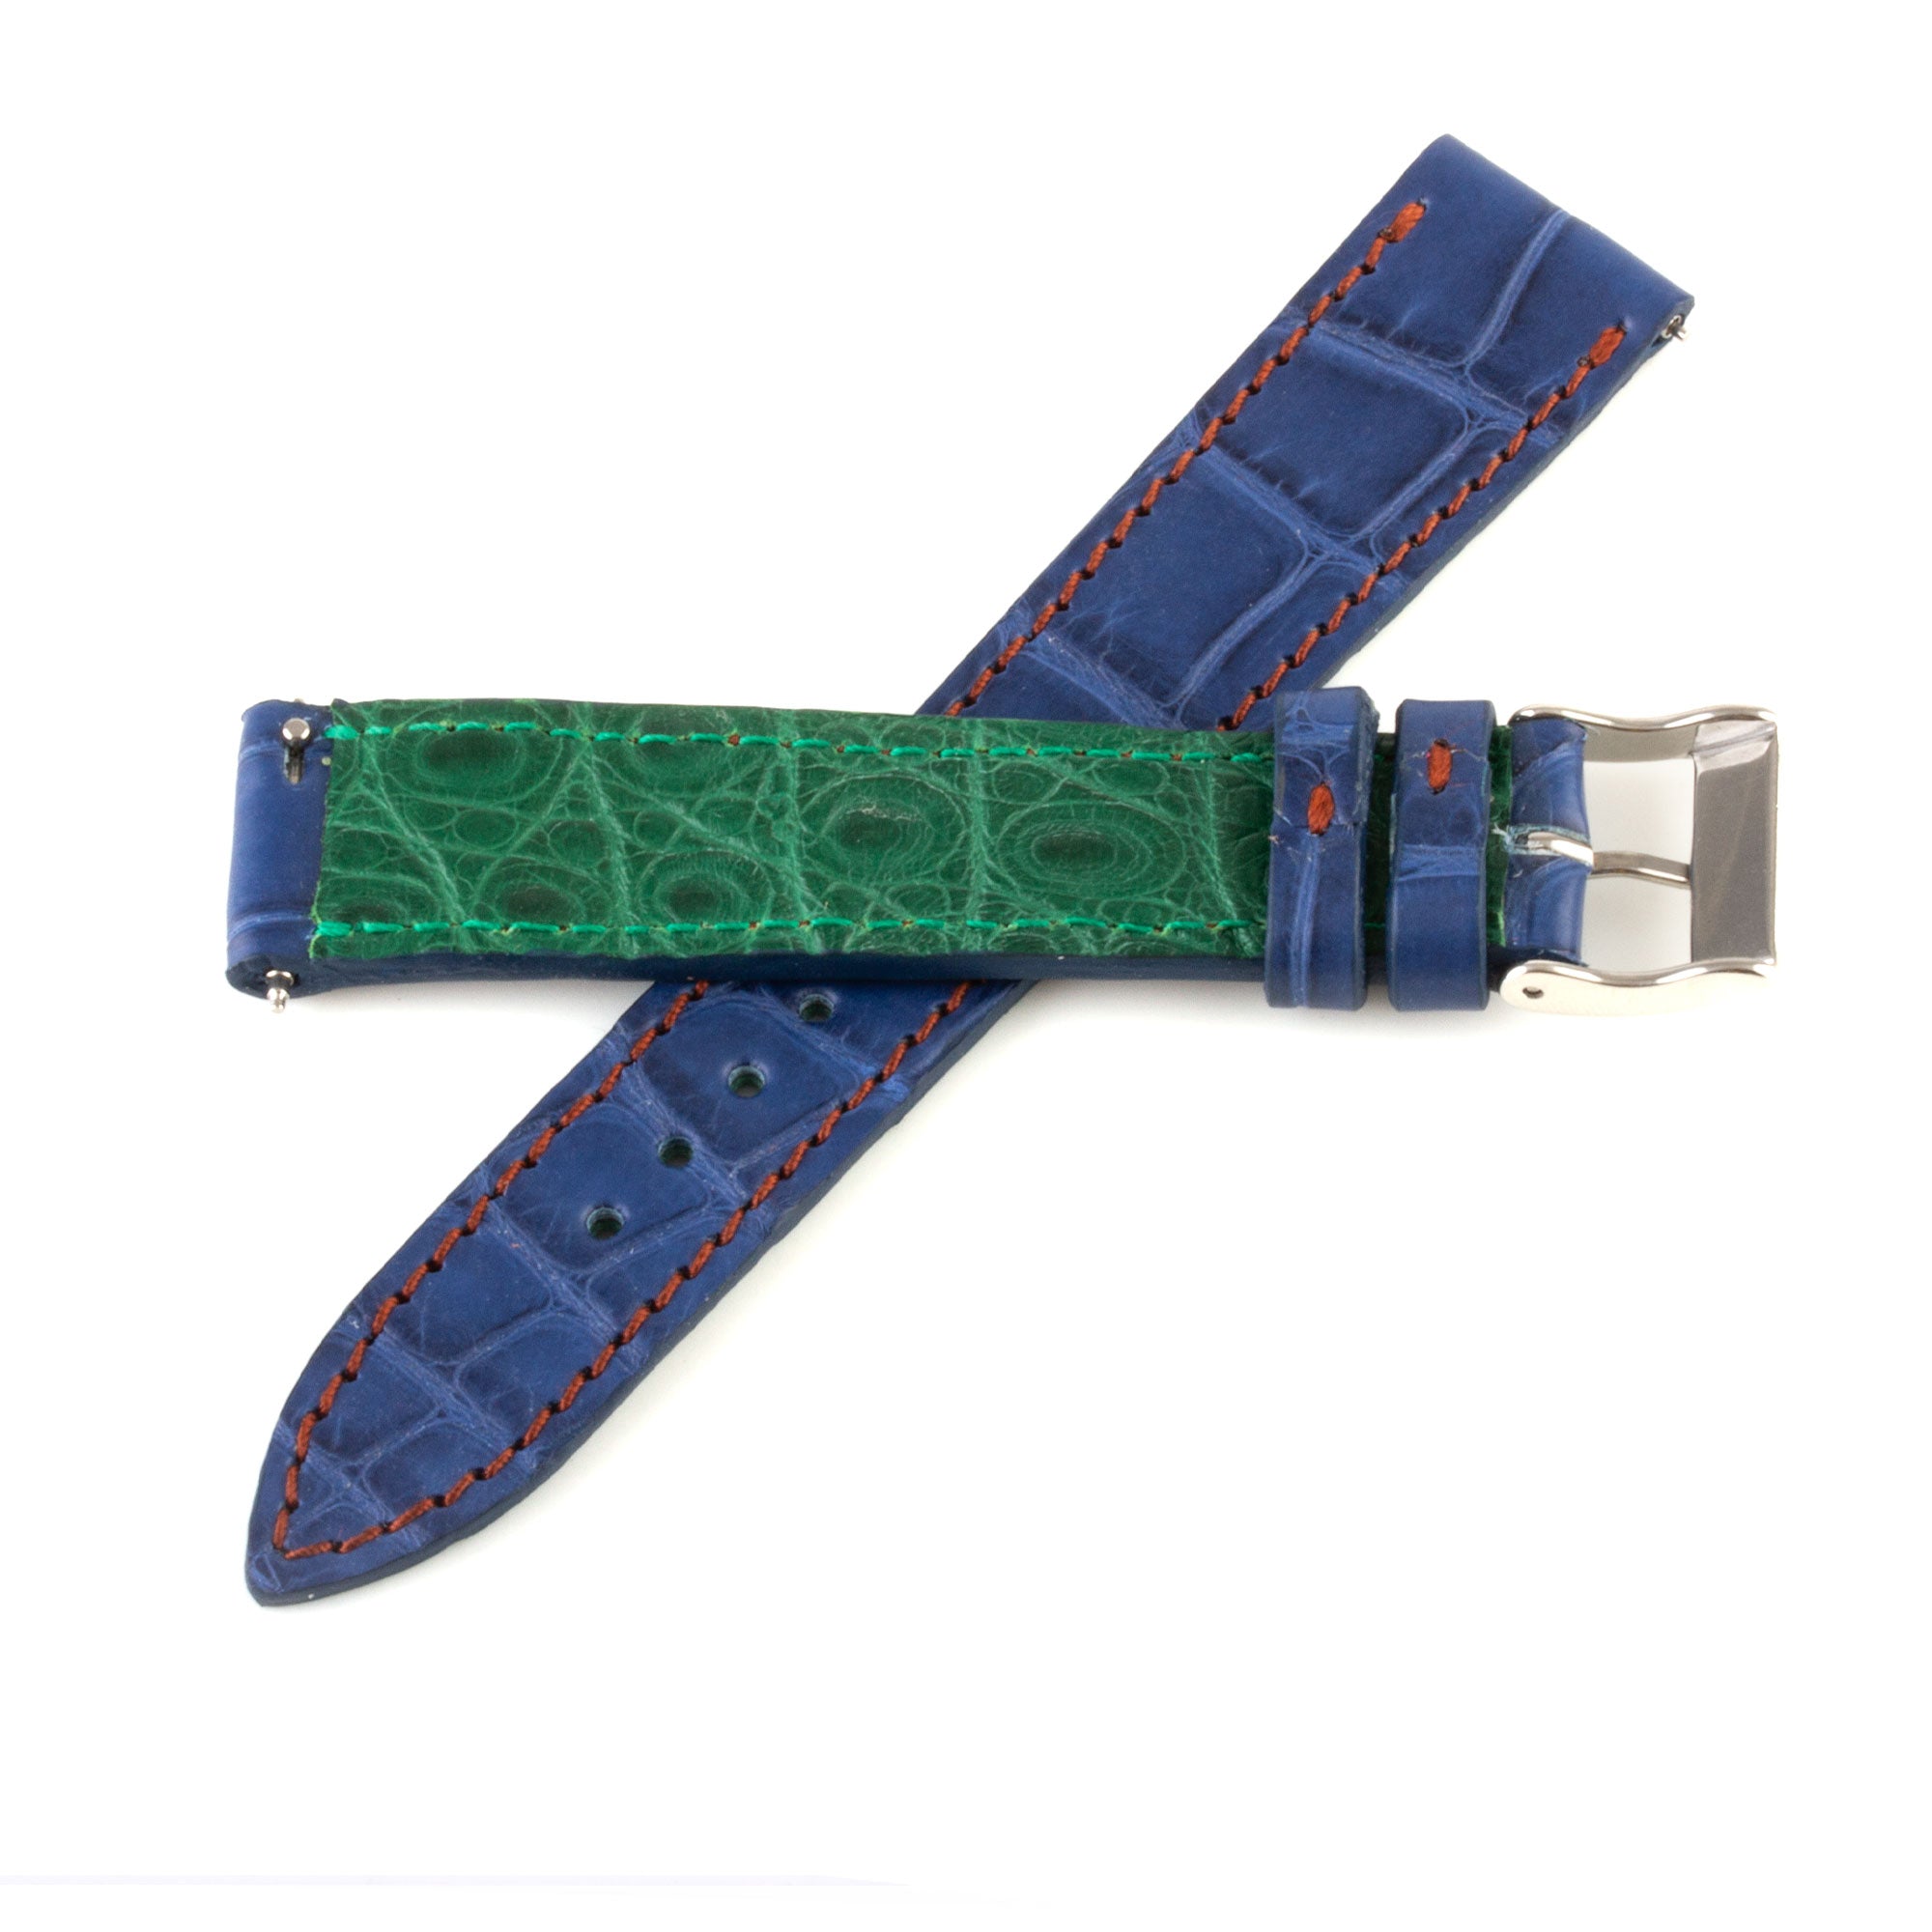 Alligator leather "Solo" watch band - 18mm width (0.71 inches) / Size M (n° 5)